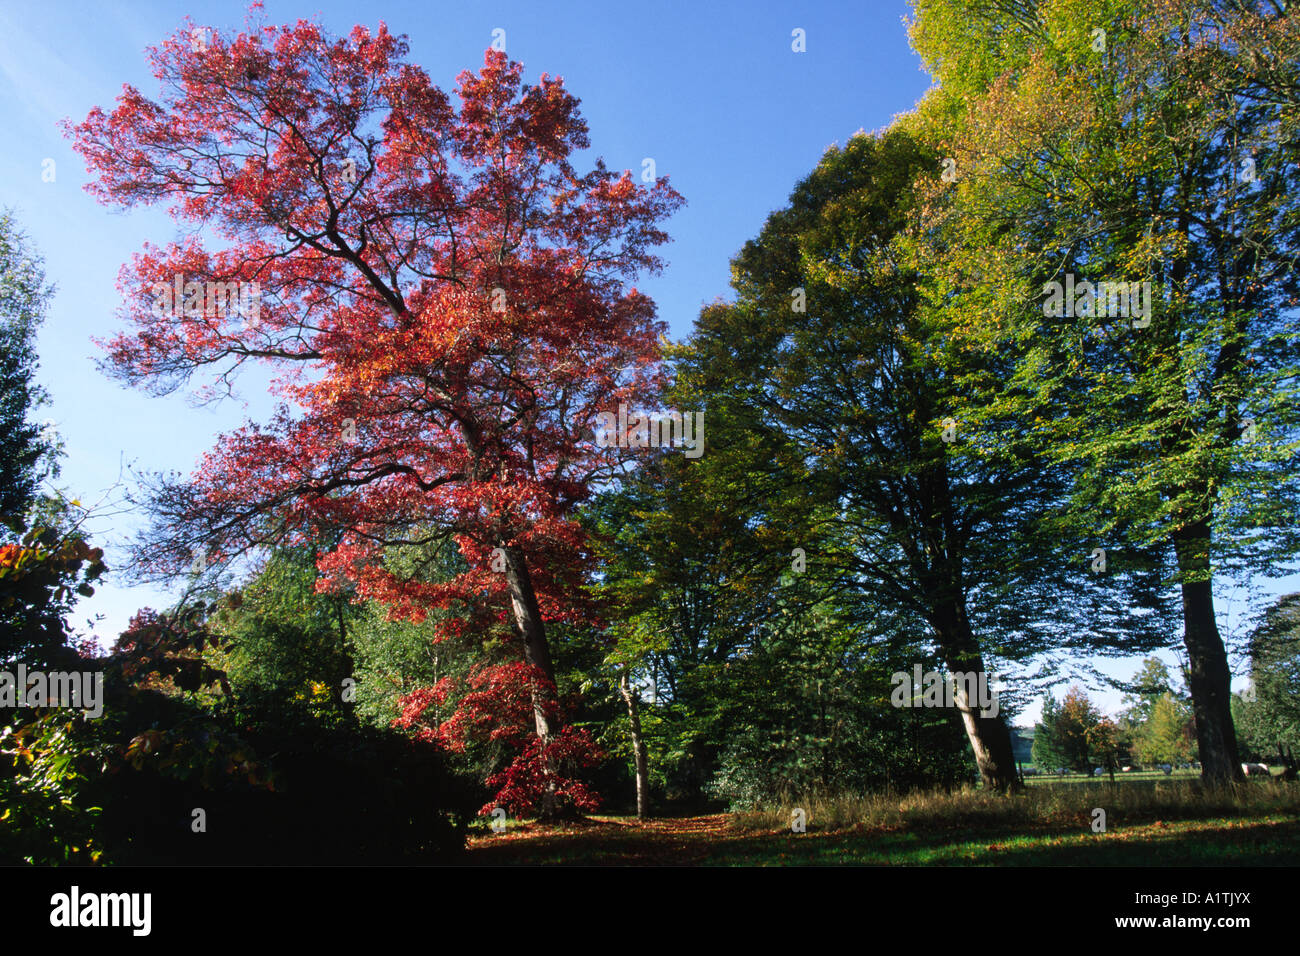 Scarlet Oak (Quercus coccinea) in Autumn foliage with Beech trees. Glansevern Gardens, Powys, Wales, UK. Stock Photo